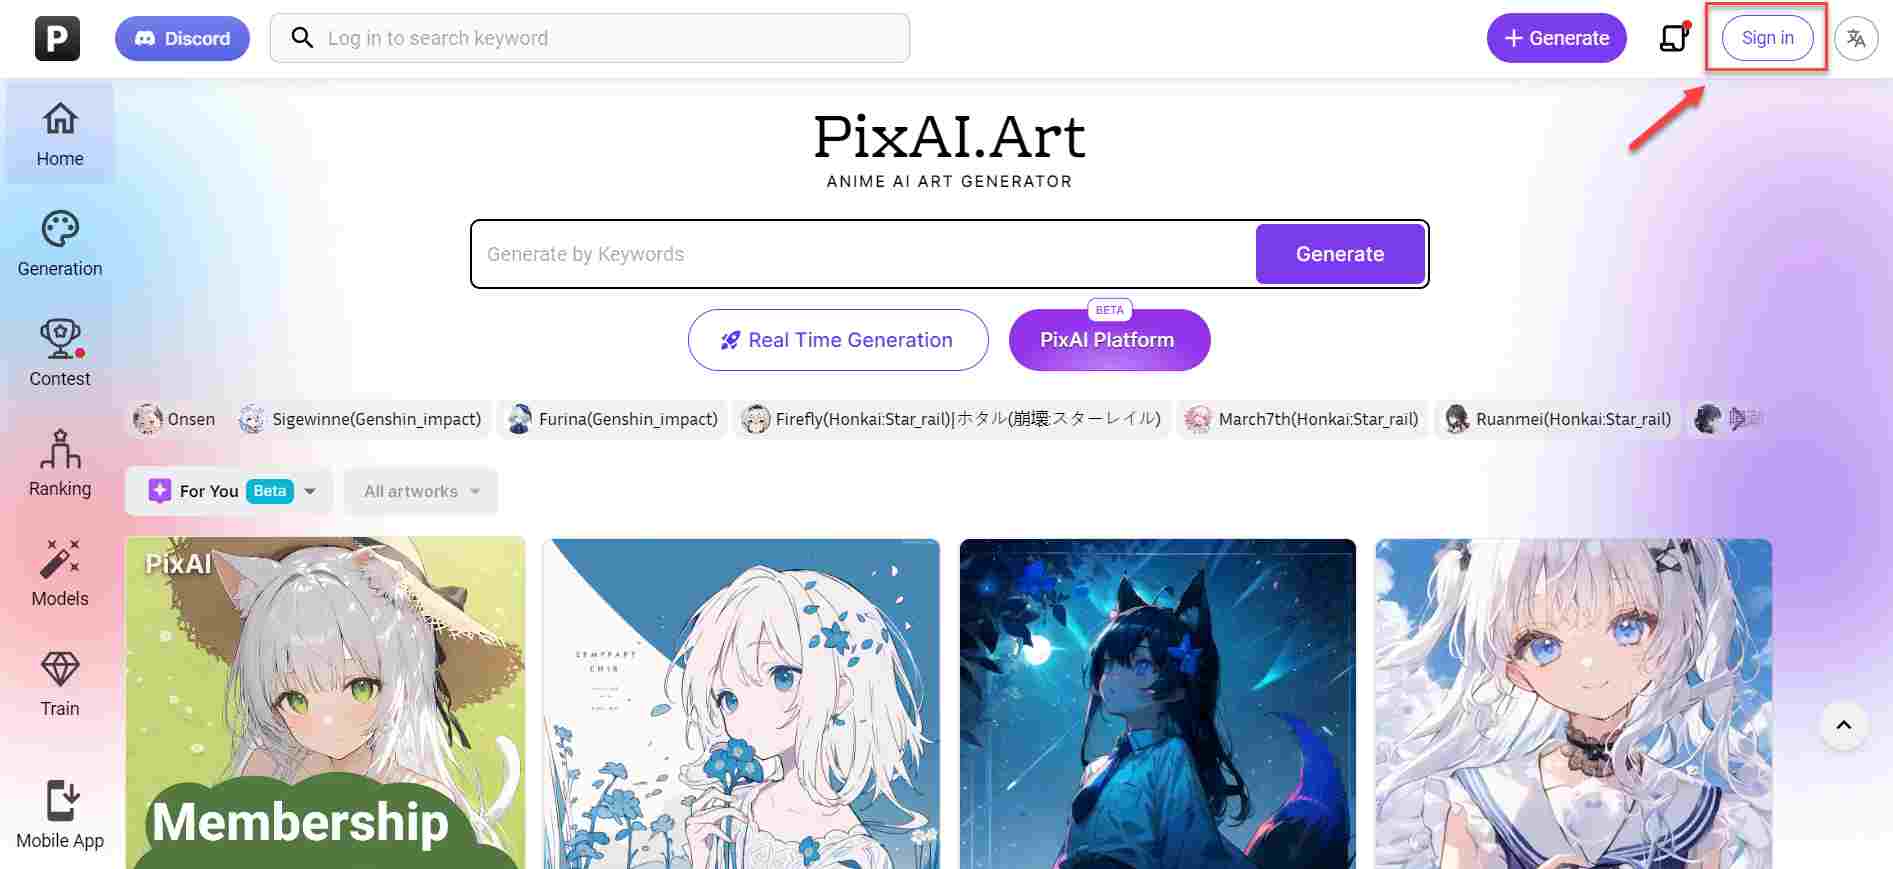 pixai.art-sign-in-page-with-the-sign-in-button-highlighted